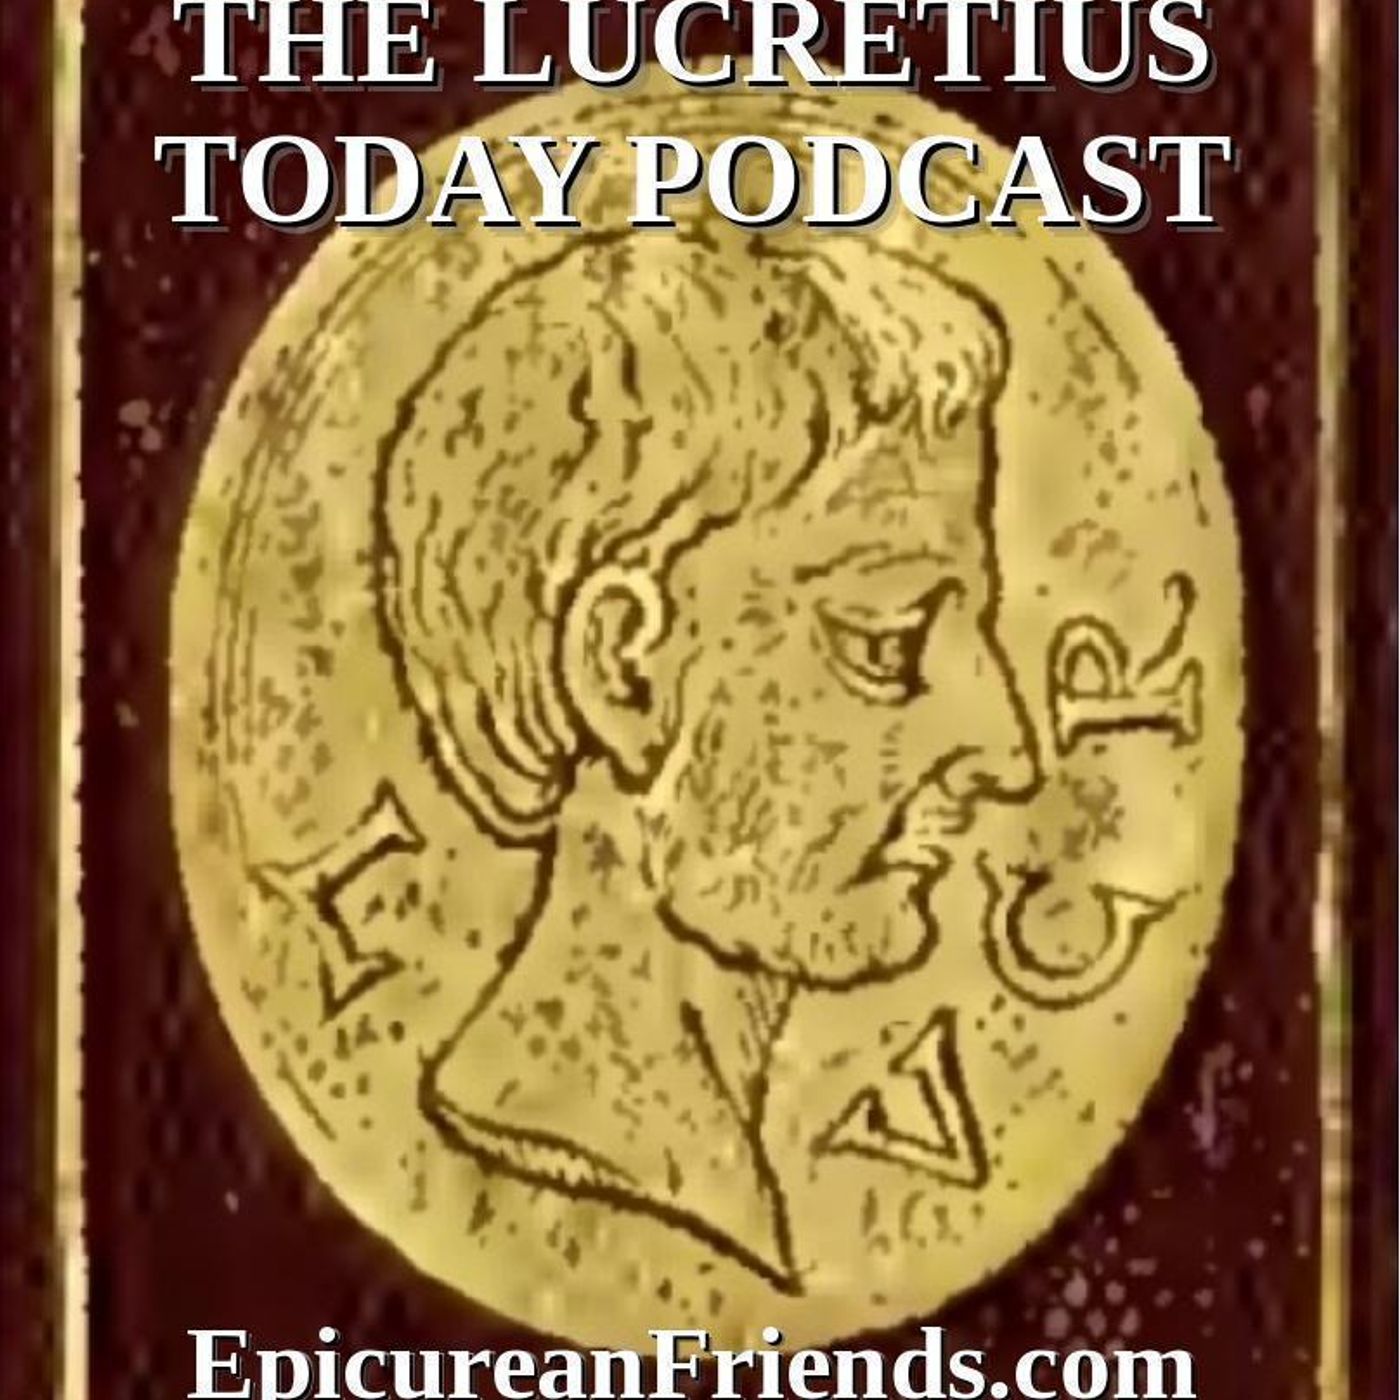 Episode 221 - Cicero’s On Ends - Book Two - Part 28 -Cicero Alleges Pleasures Of The Mind Cannot Offset Pain In Epicurean Philosophy